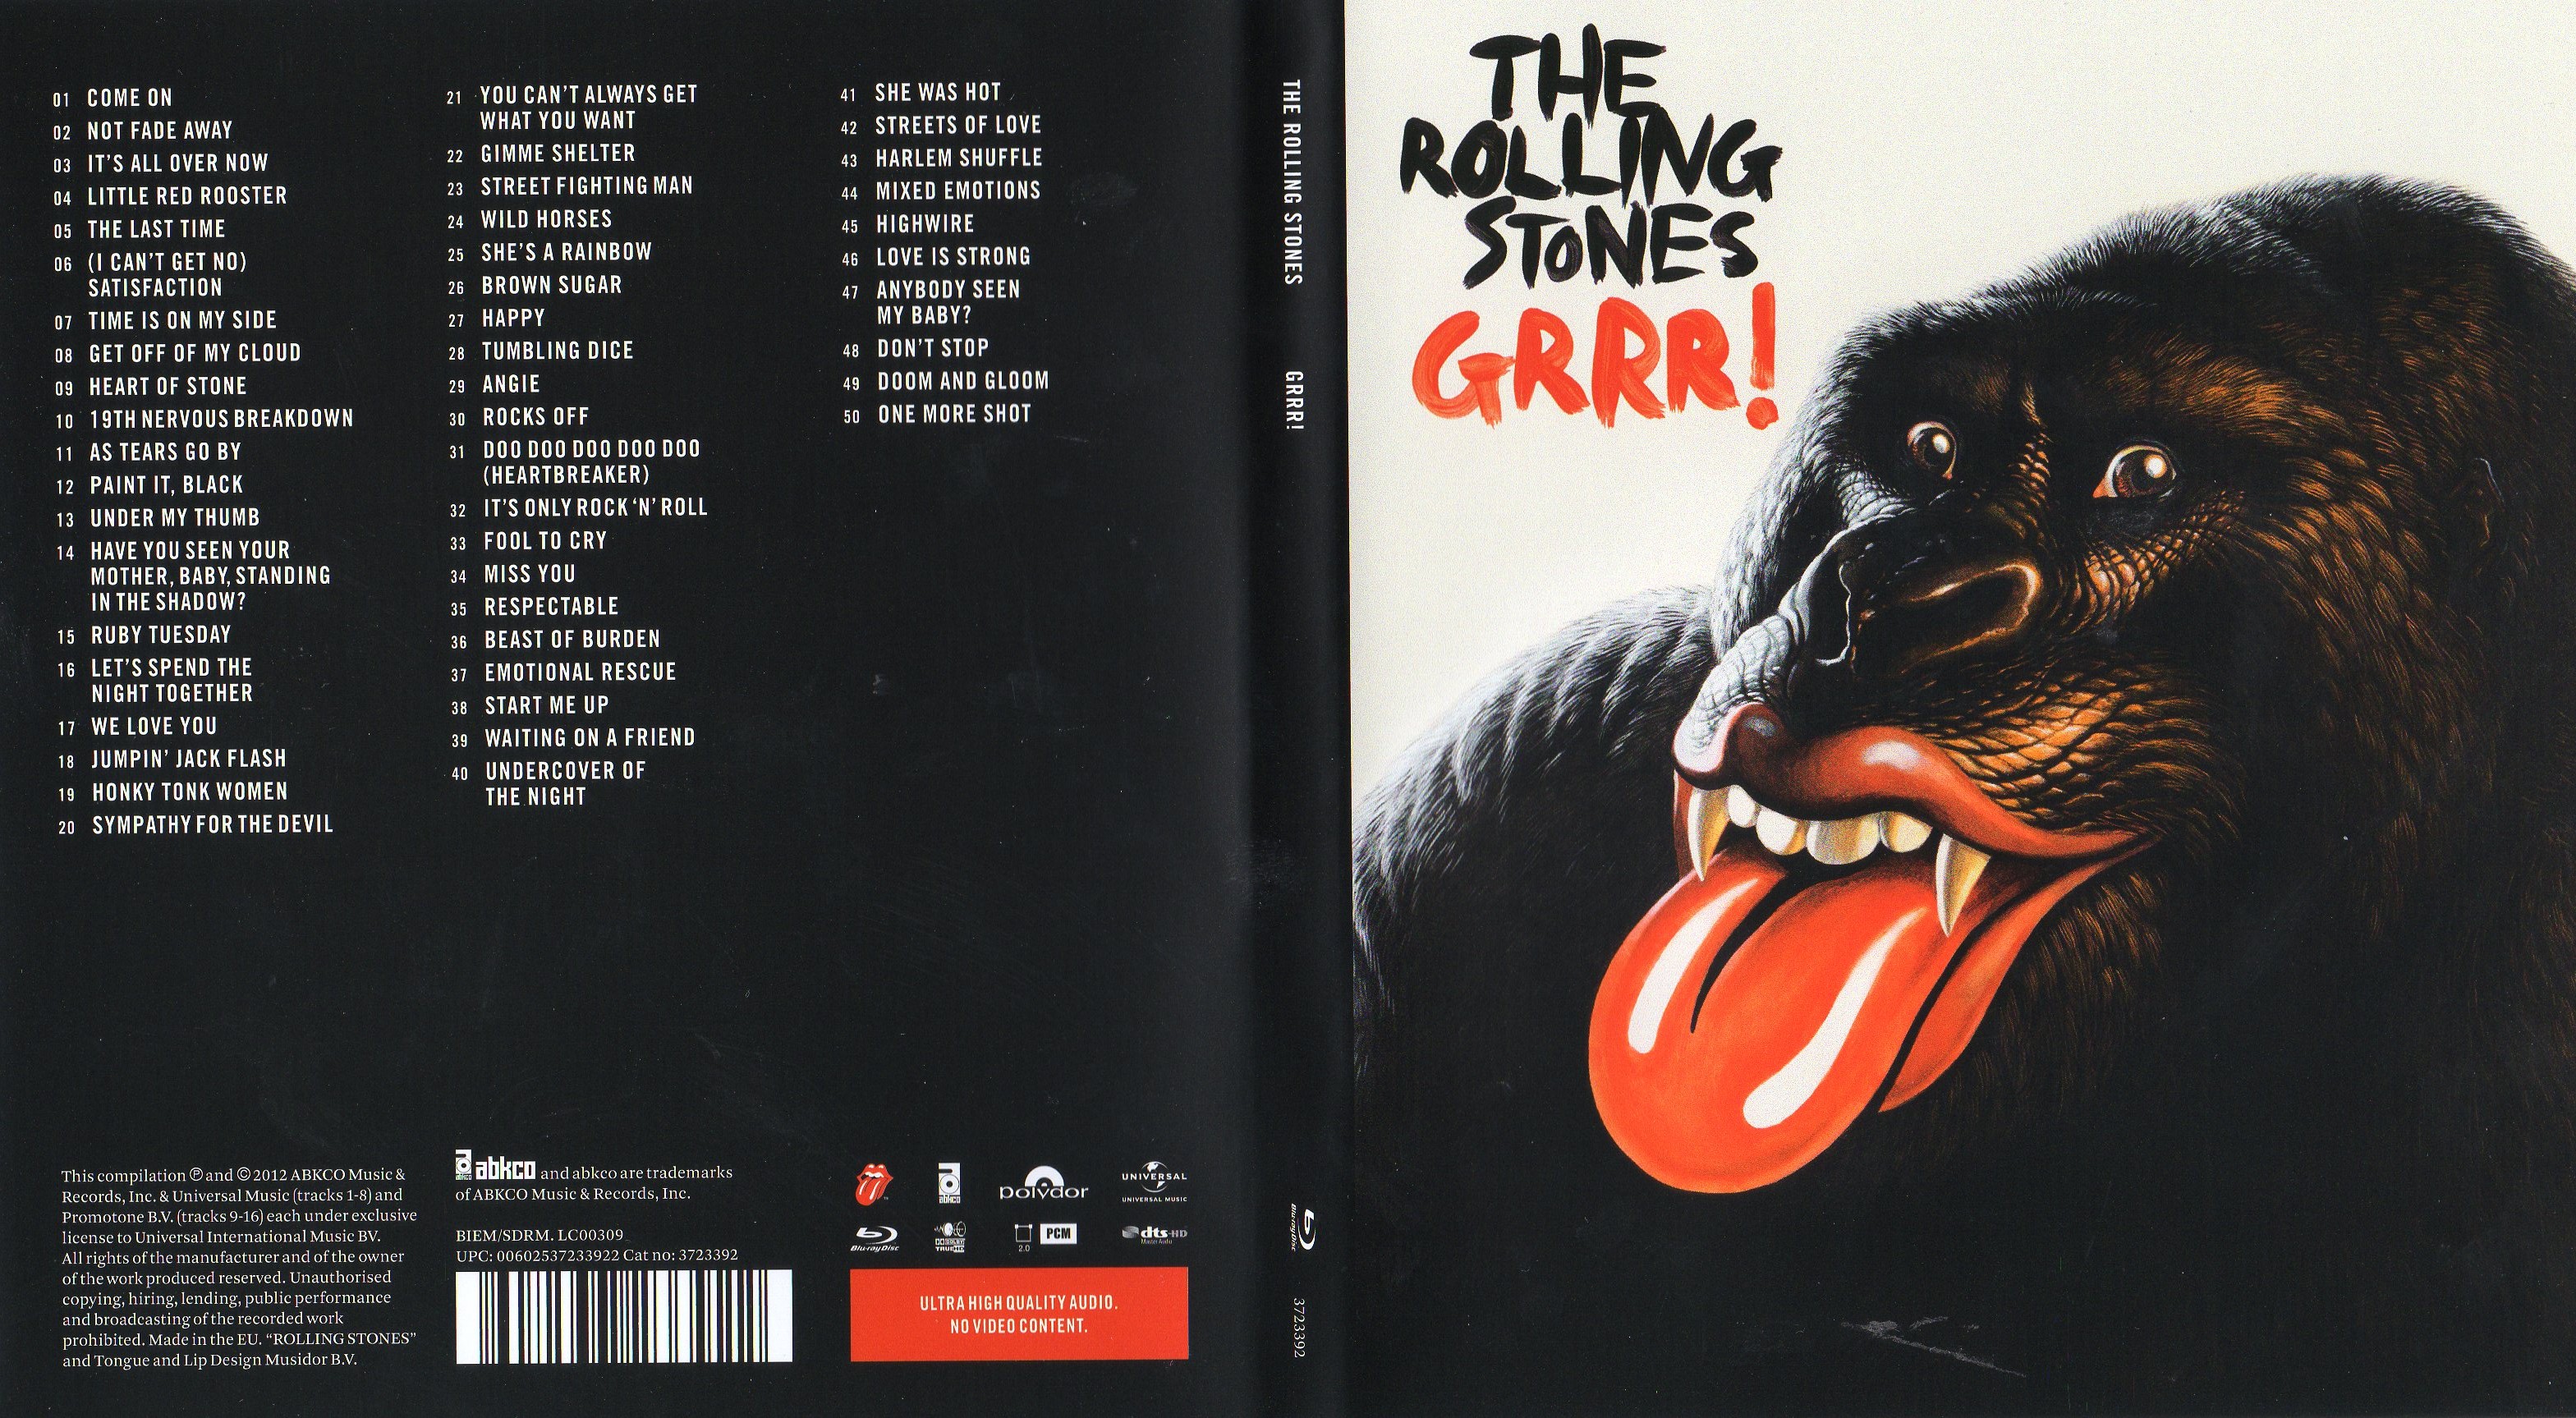 Jaquette DVD The Rolling stones Grrr (BLU-RAY)